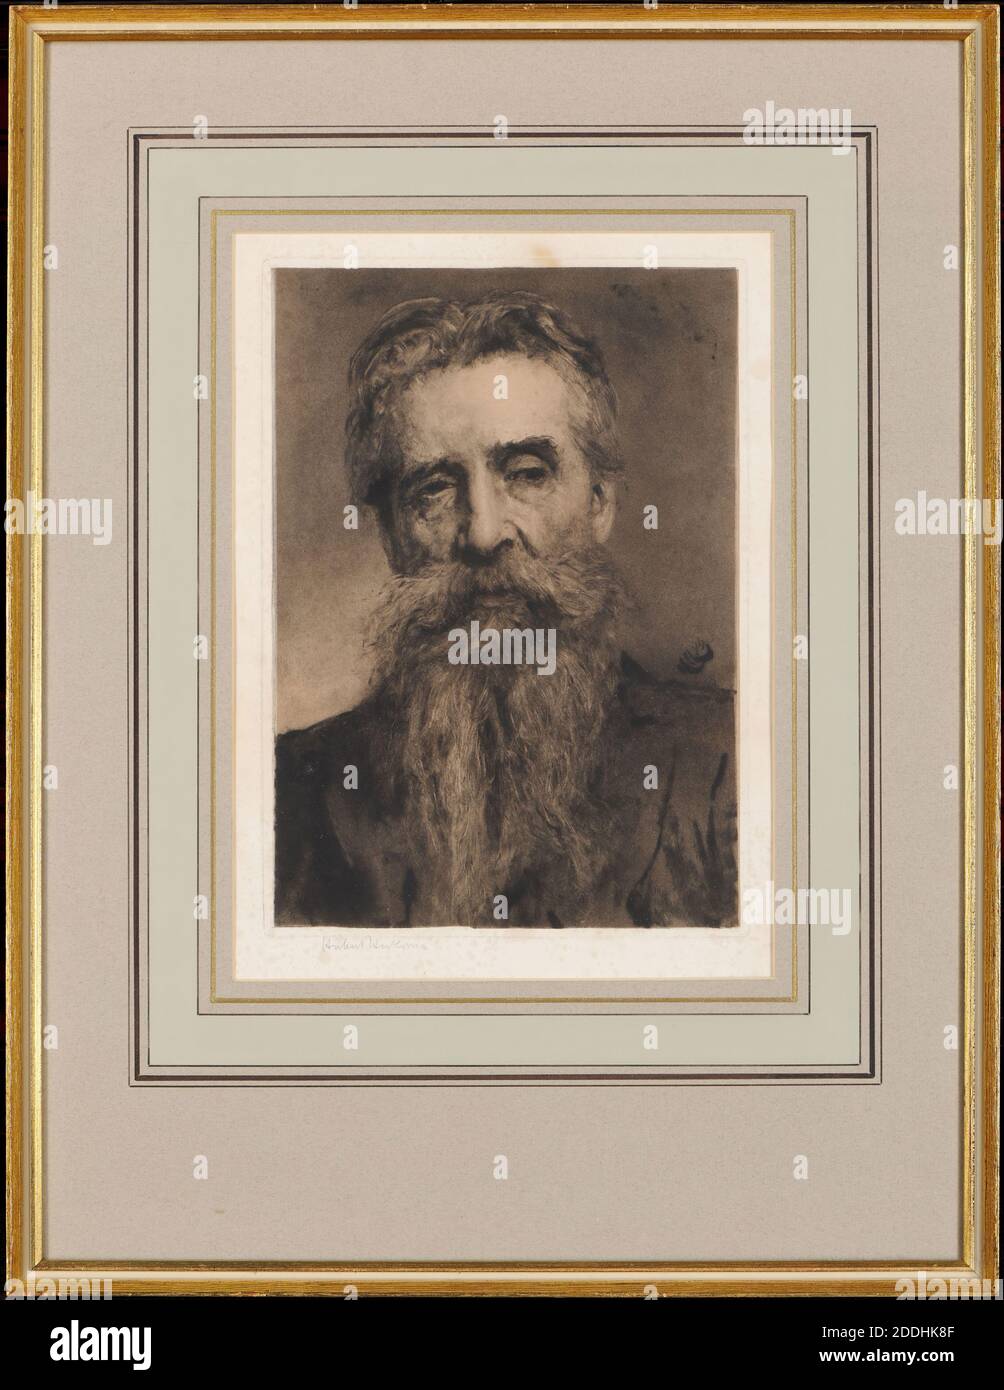 Portrait Of E R Taylor, 1894 Sir Hubert von Herkomer (d.1914), E R Taylor was an artist and teacher and founded the Ruskin Pottery at Smethwick in December 1898., 19th Century, Print, Portrait, Frame, Black and White, Printing, Mezzotint, Artist, Birmingham Society of Artists, Works on Paper Stock Photo